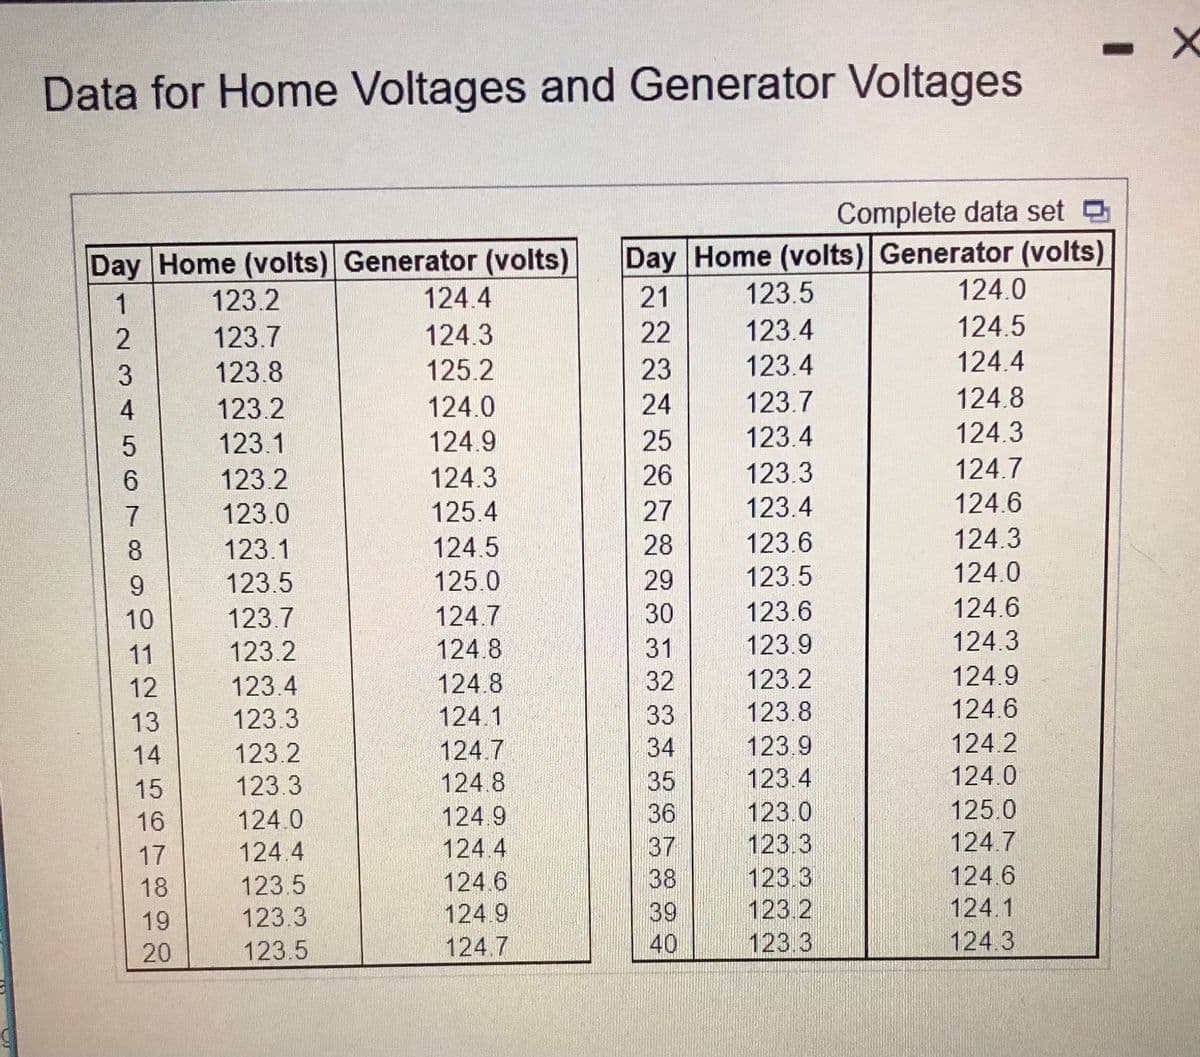 fi
- X
Data for Home Voltages and Generator Voltages
Complete data set
Day Home (volts) Generator (volts) Day Home (volts) Generator (volts)
1
123.2
124.4
21
123.5
124.0
2
123.7
124.3
22
123.4
124.5
3
123.8
125.2
23
123.4
124.4
4
123.2
124.0
24
123.7
124.8
5
123.1
124.9
25
123.4
124.3
6
123.2
124.3
26
123.3
124.7
7
123.0
125.4
27
123.4
124.6
8
123.1
124.5
28
123.6
124.3
9
123.5
125.0
29
123.5
124.0
10
123.7
124.7
30
123.6
124.6
11
123.2
124.8
31
123.9
124.3
12
123.4
124.8
32
123.2
124.9
13
123.3
124.1
33
123.8
124.6
14
123.2
124.7
34
123.9
124.2
15
123.3
124.8
35
123.4
124.0
16
124.0
124.9
36
123.0
125.0
17
124.4
124.4
37
123.3
124.7
18
123.5
124.6
38
123.3
124.6
19
123.3
124.9
39
123.2
124.1
20
123.5
124.7
40
123.3
124.3